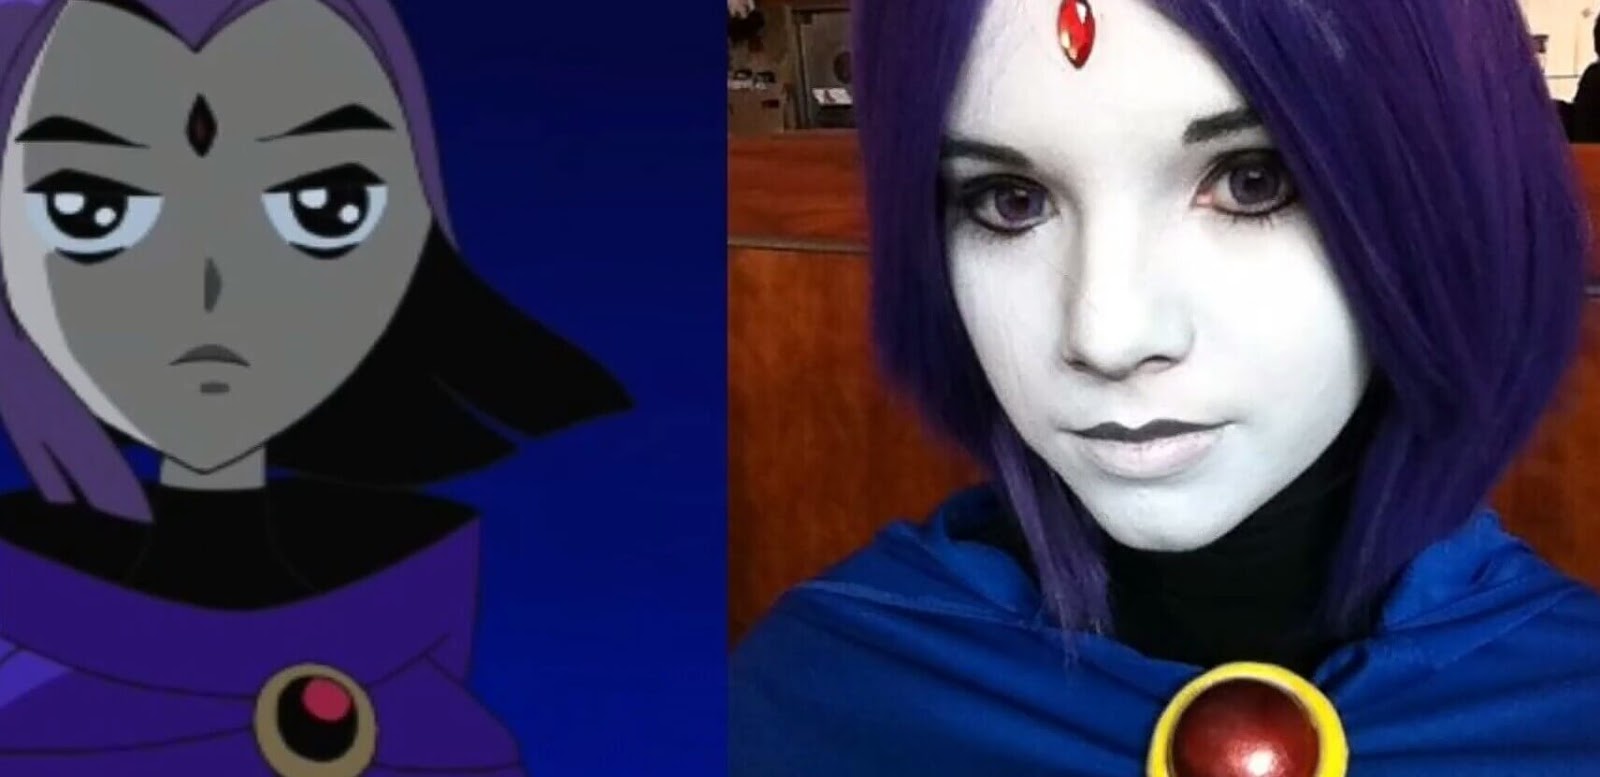 20 Amazing Cosplays That Look Extremely Similar To The Original Cartoons - That skin color is right on the spot.